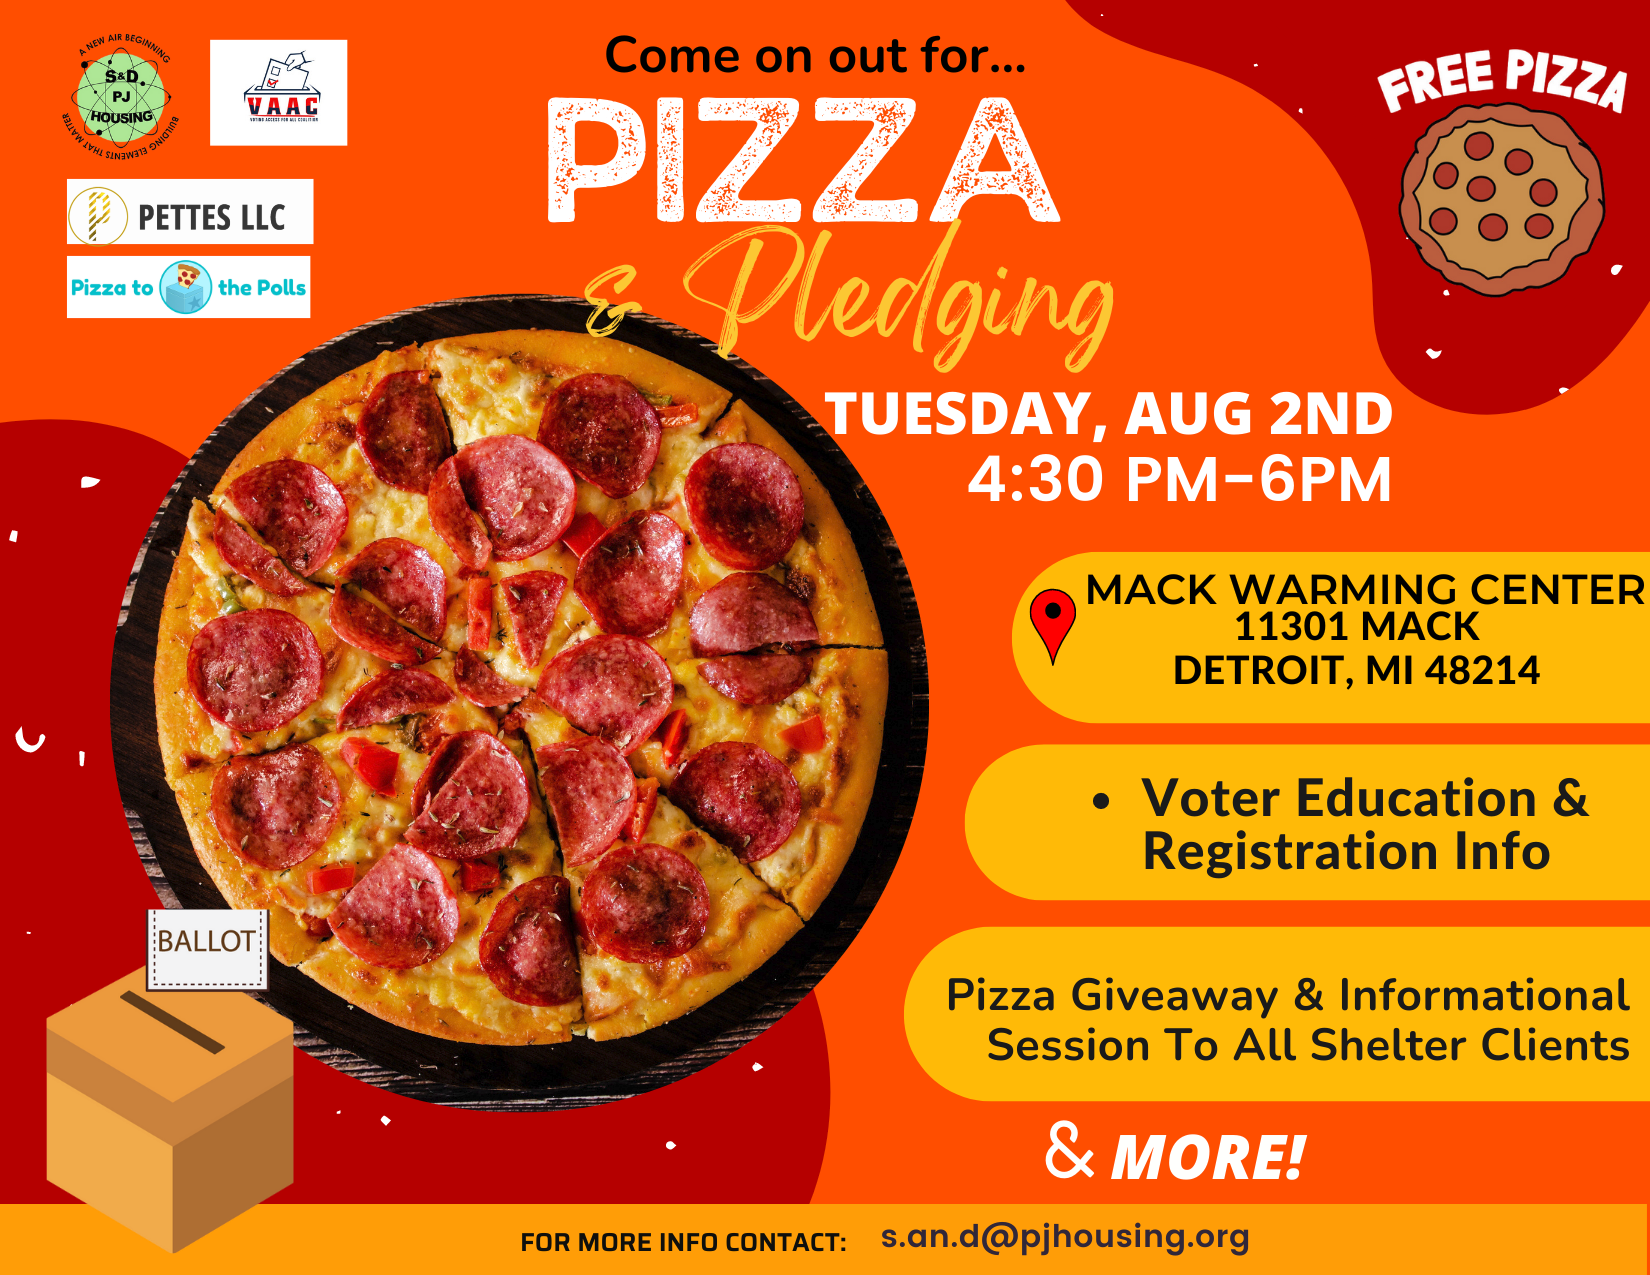 Pizza to the Polls Returns!